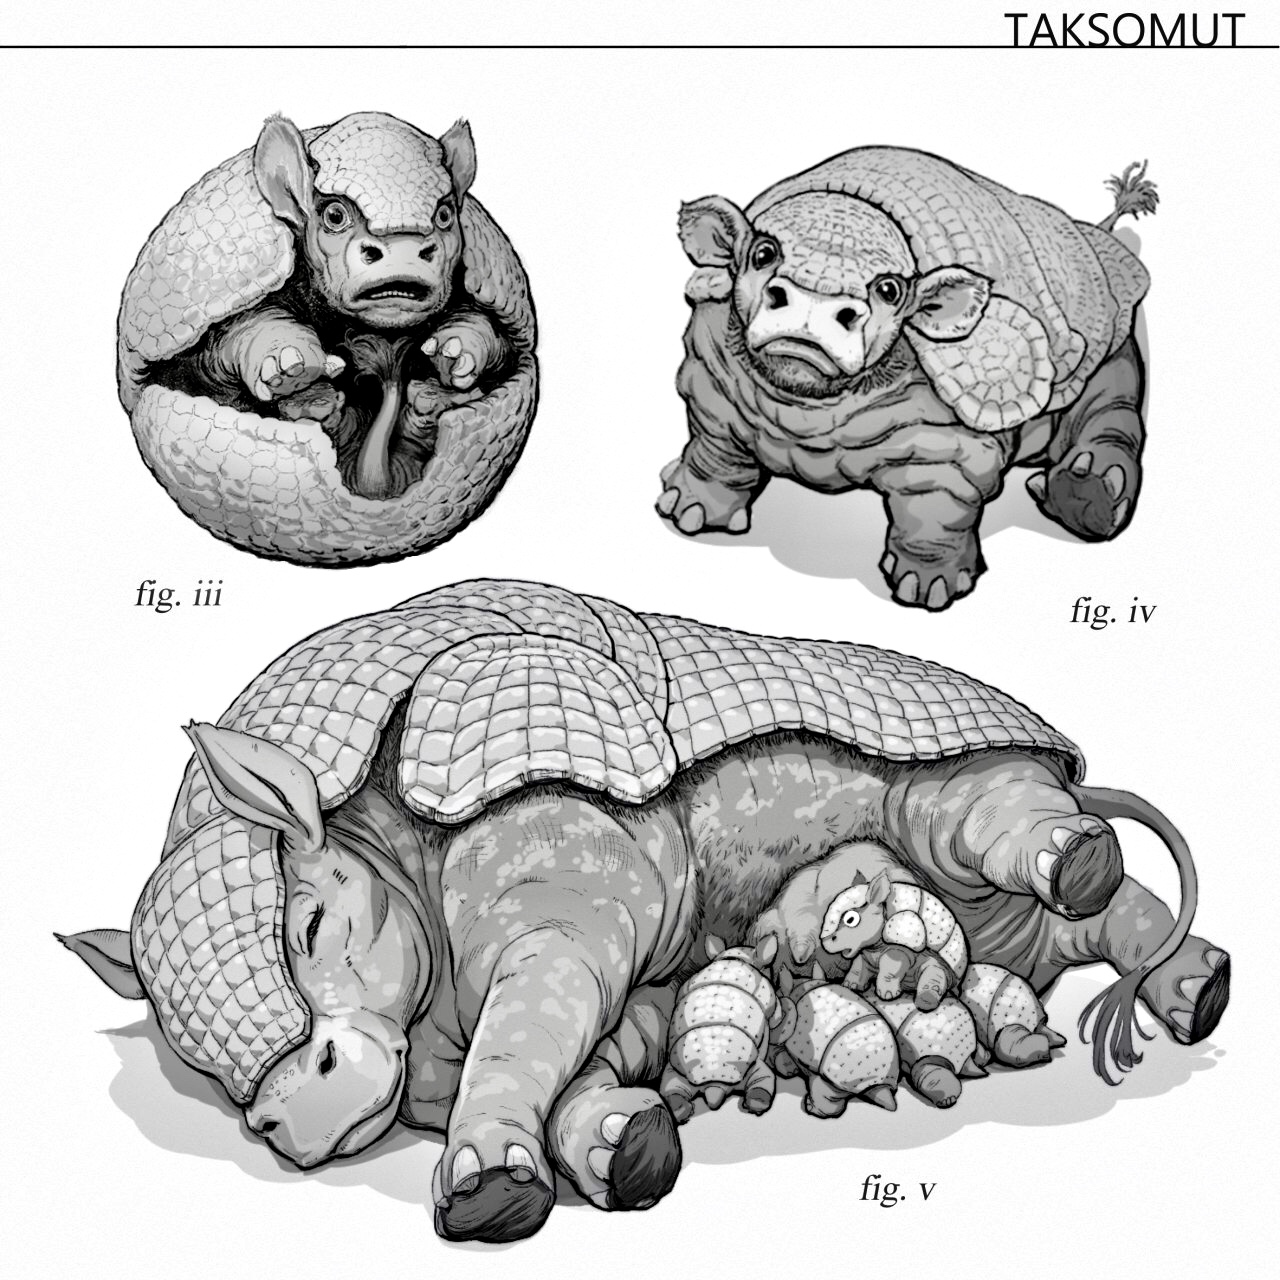  The taksomut offspring are quite hardy themselves; their flexibility allows them to roll into tiny spheres as they follow their mother about on the the surface. This ability offers them protection from smaller predators and would-be scavengers who m